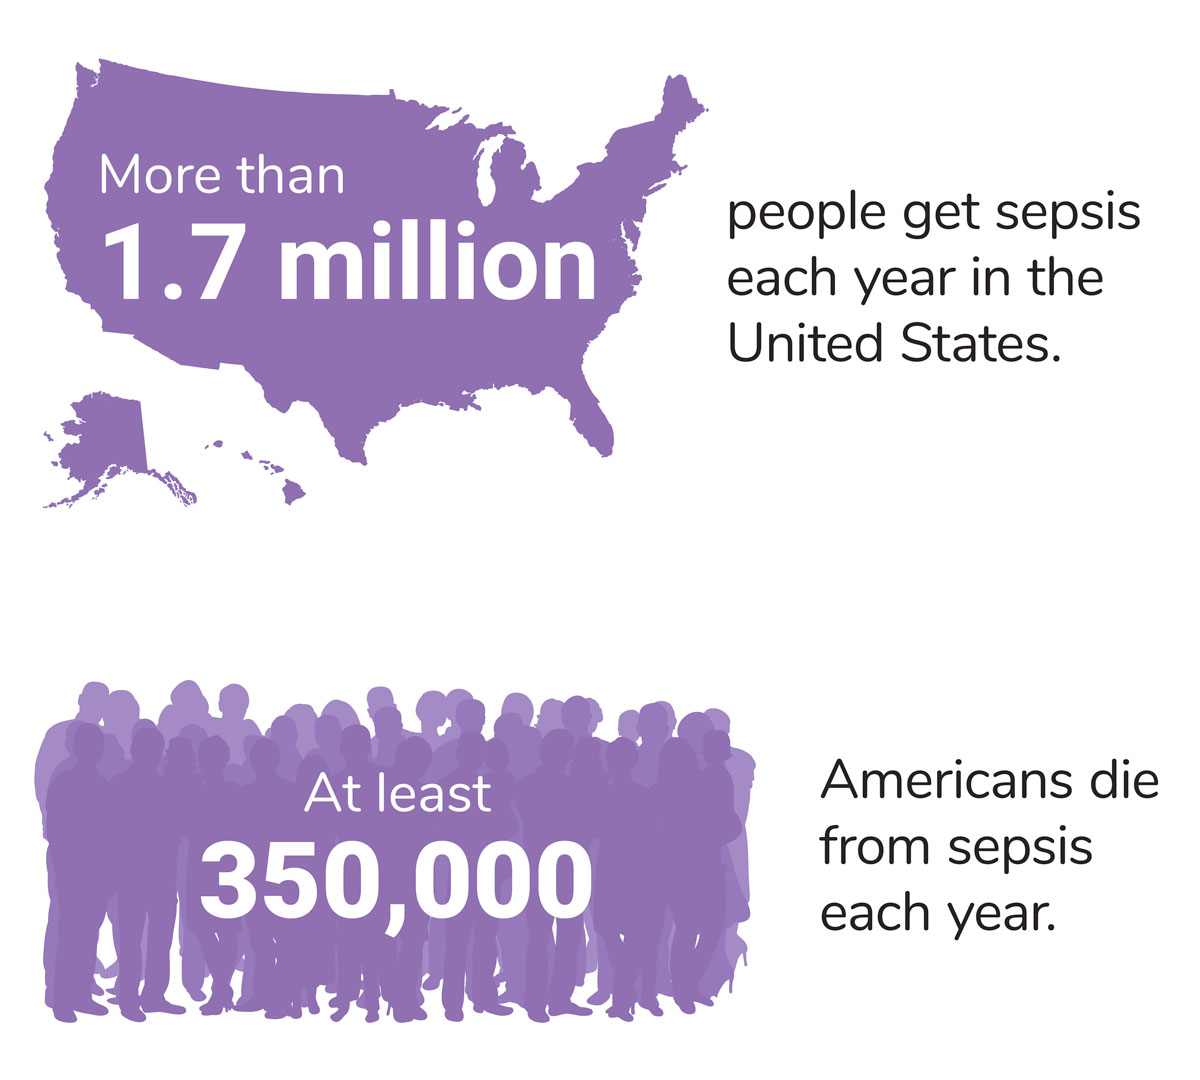 Top: Text over a silhouetted map of the United States that reads, More than 1.7 million people get sepsis each year in the United States. Bottom: Text over a background silhouette of people that reads, At least 350,000 Americans die from sepsis each year.